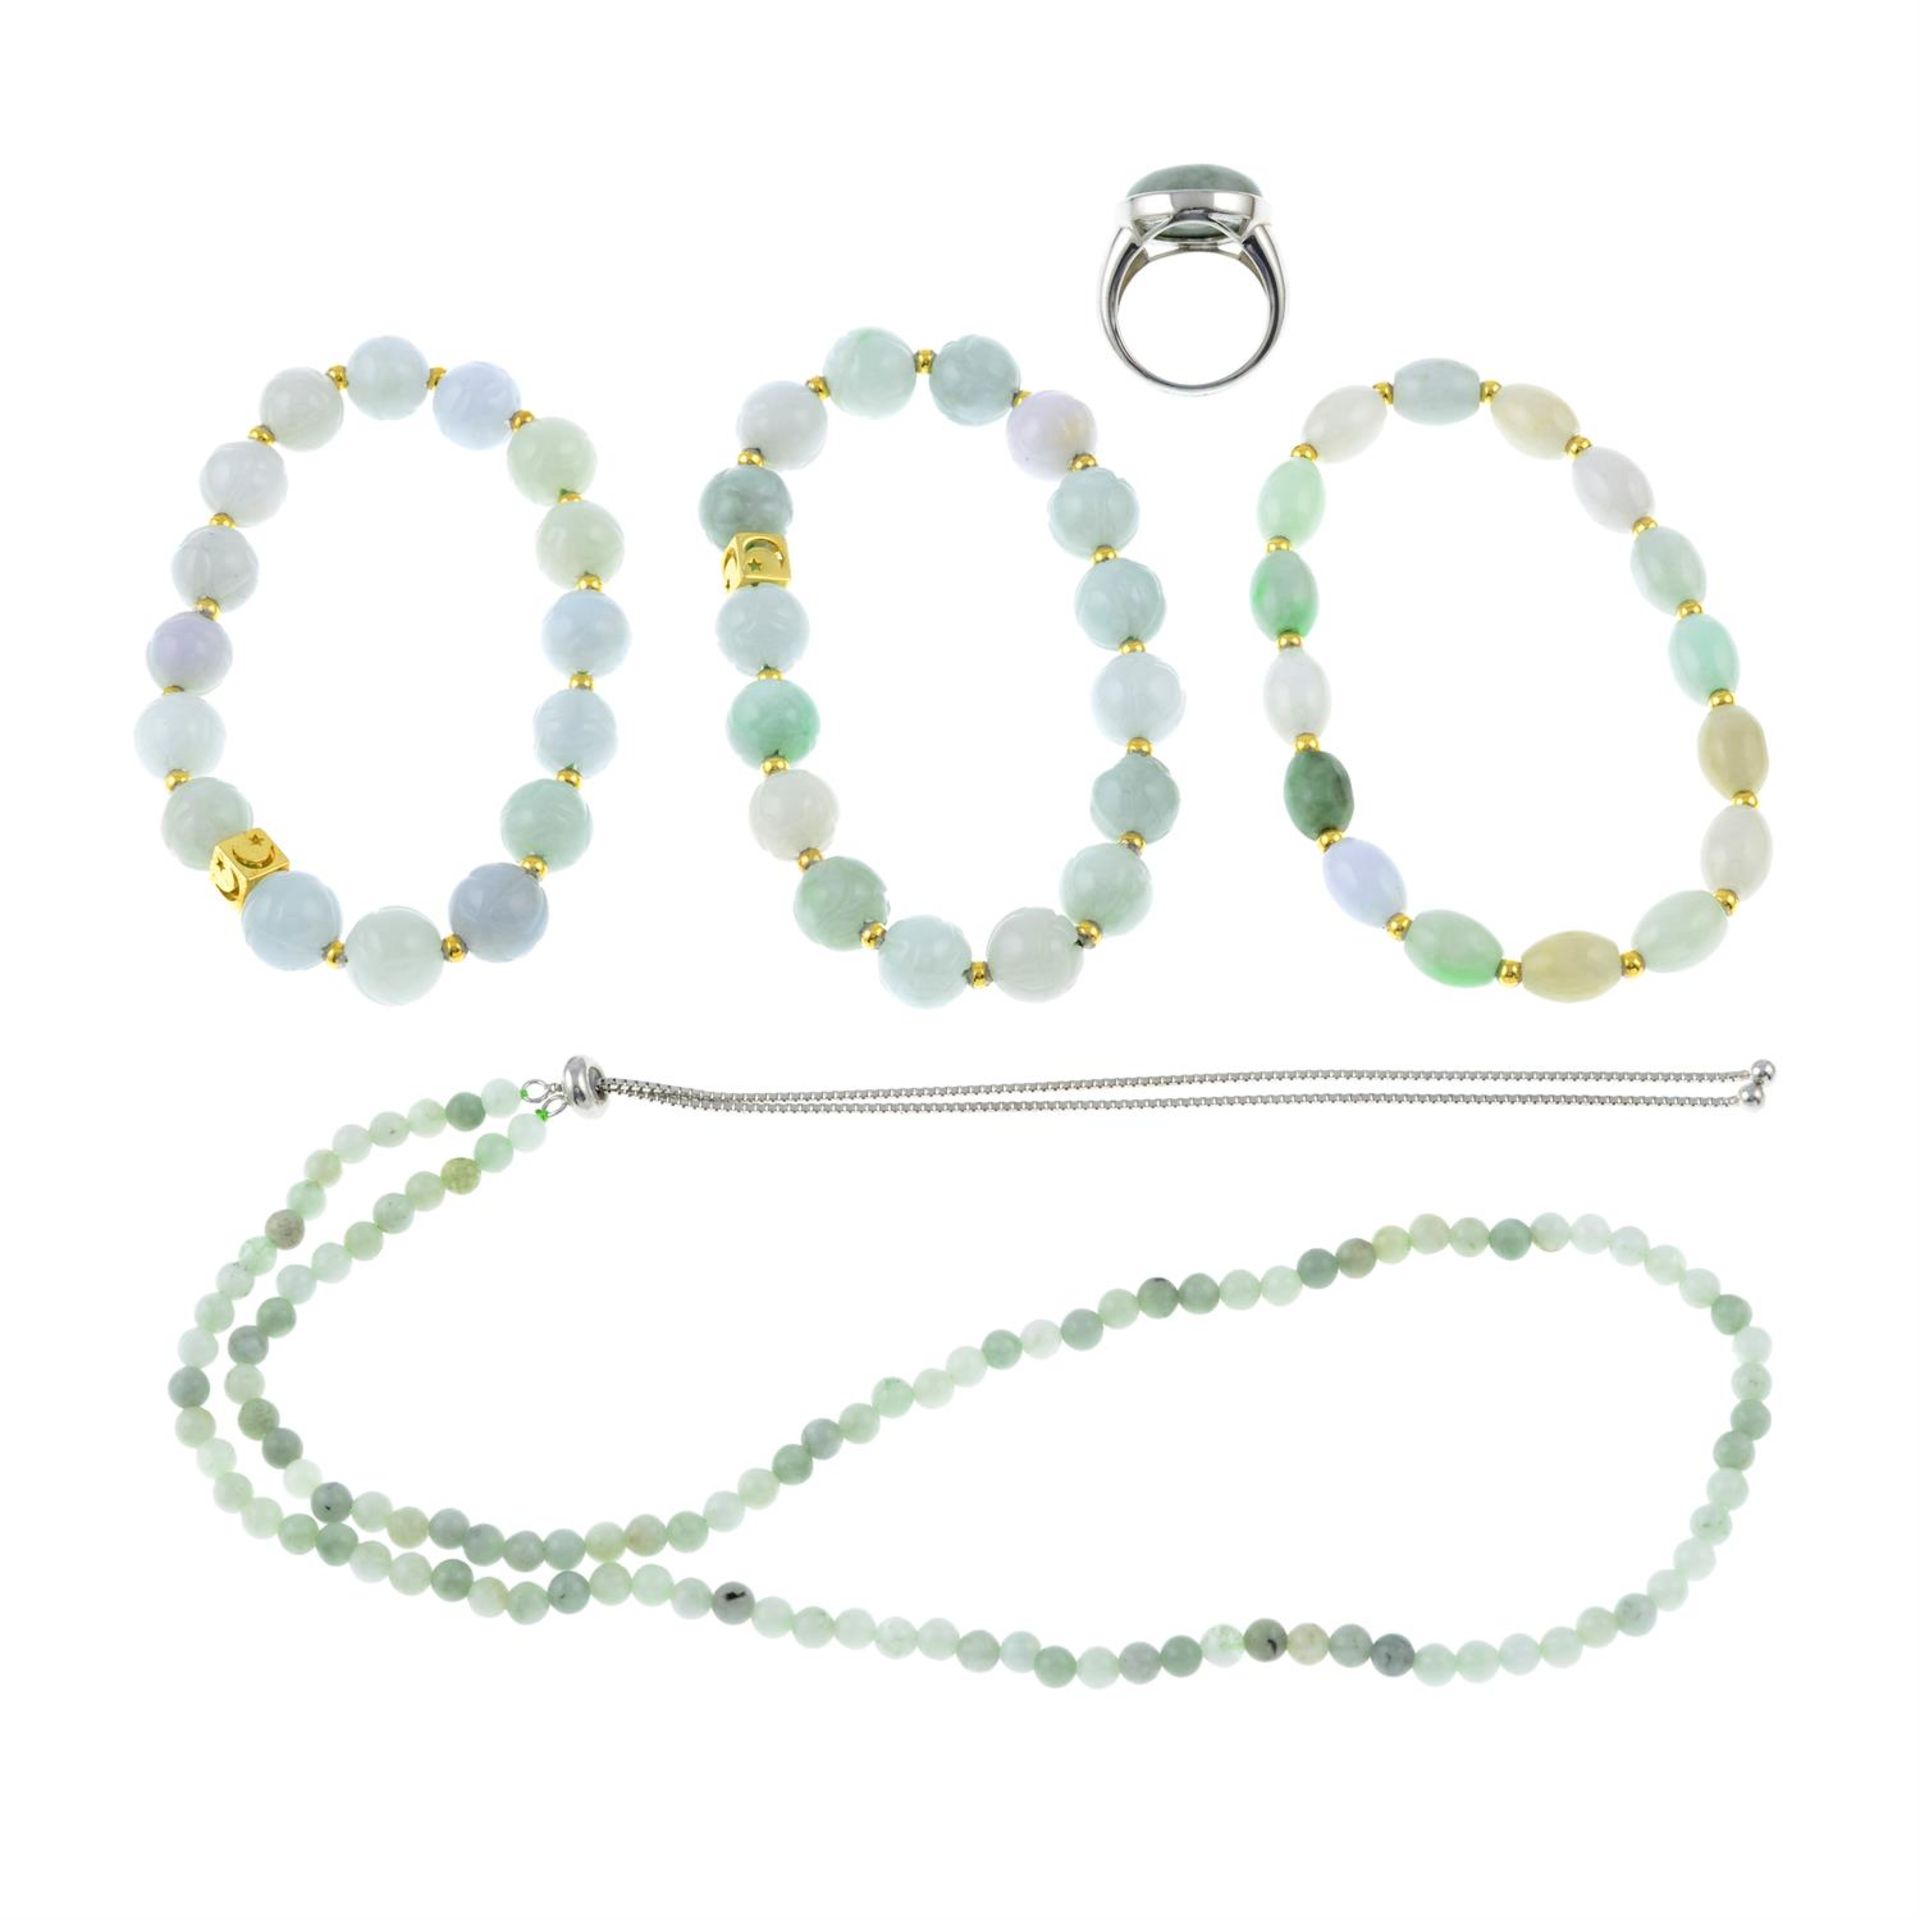 Three bracelets, one pendant, one necklace and one ring (jadeite and silver) - Image 2 of 2